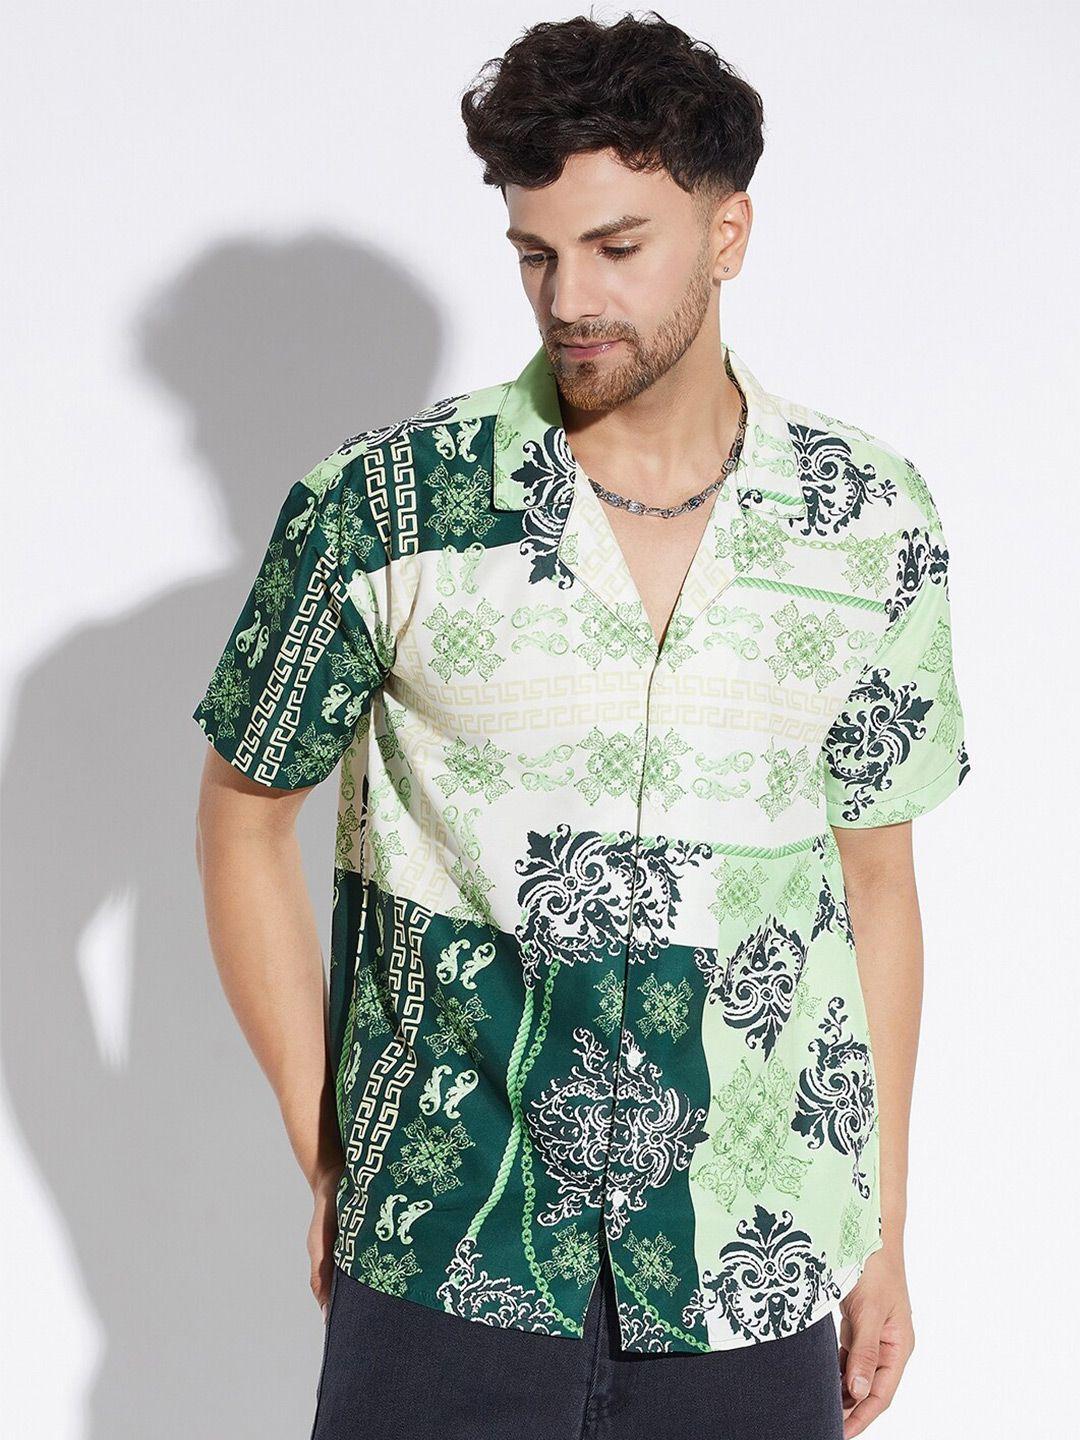 fugazee relaxed ethnic printed oversized fit spread collar casual shirt